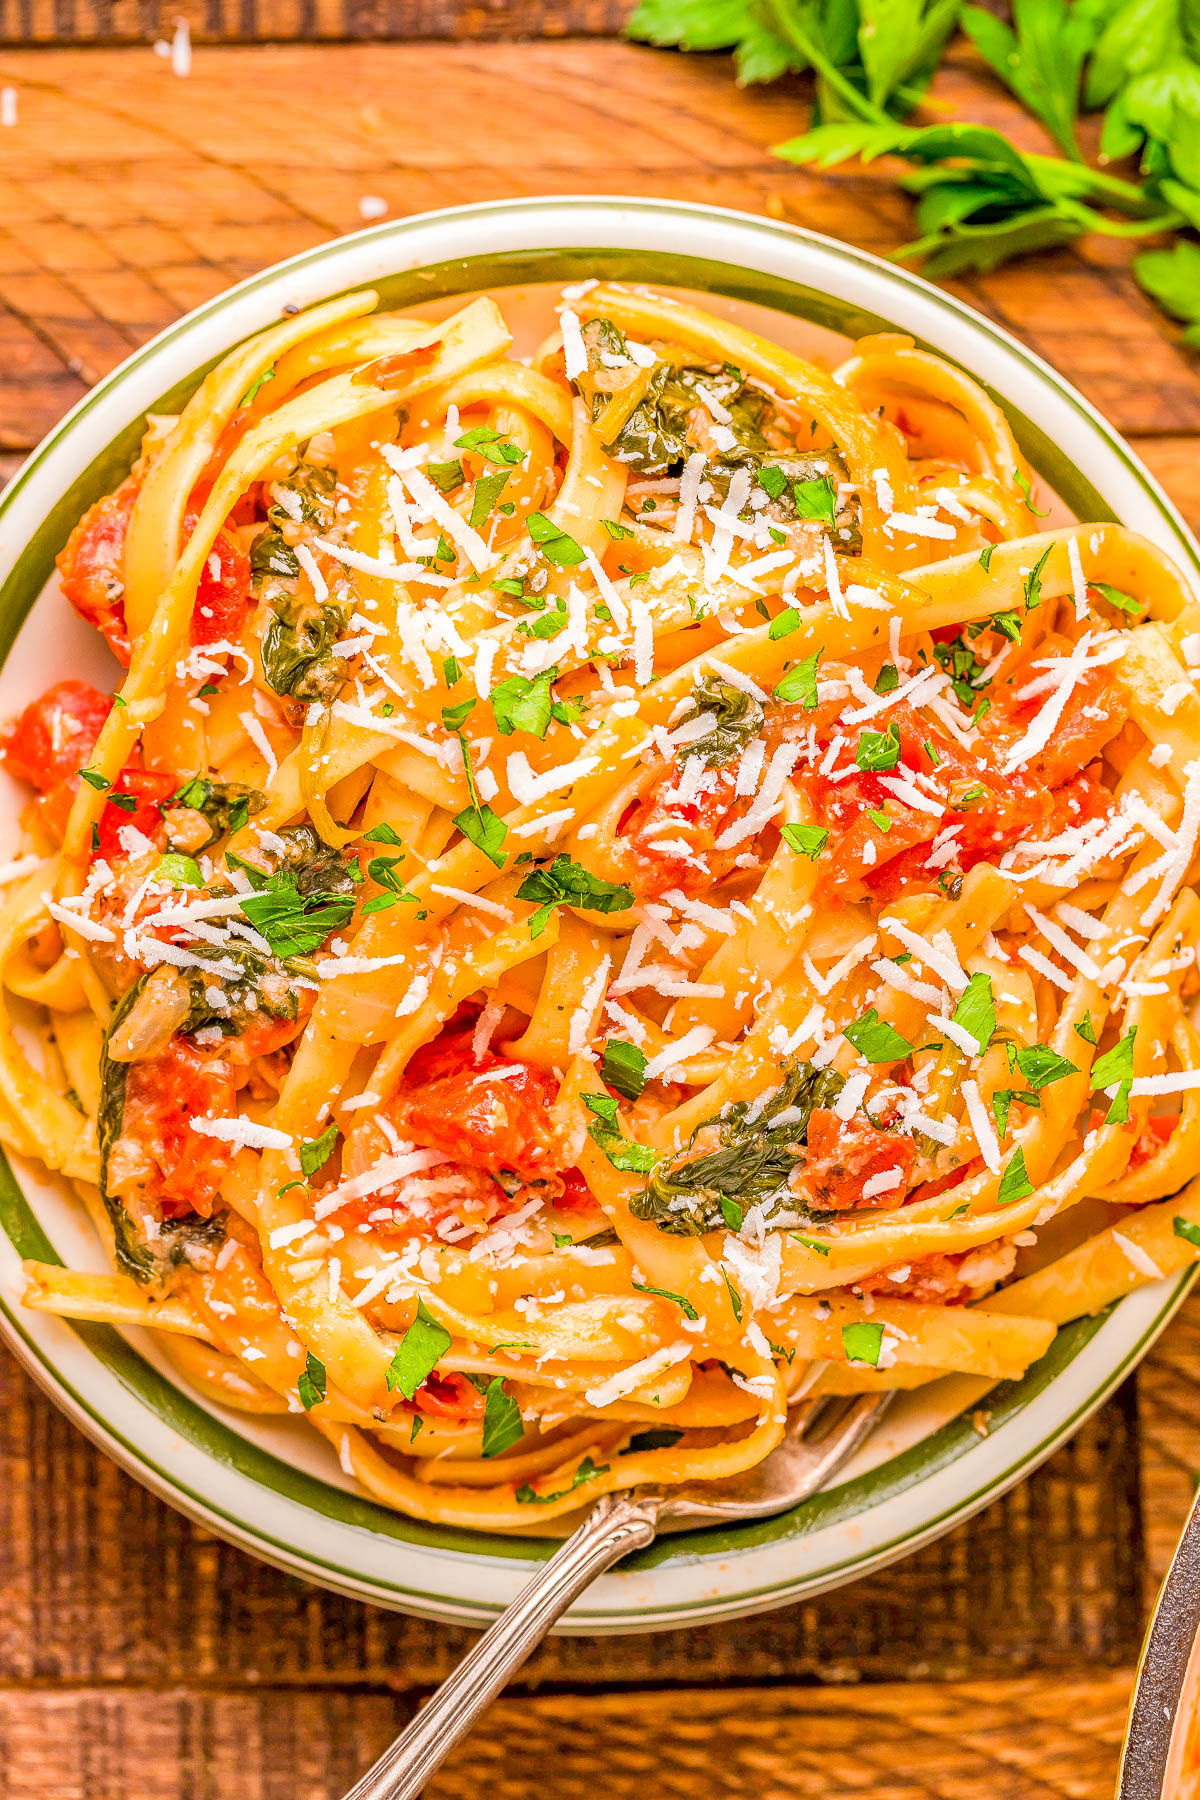 Pasta with Vodka Sauce - Make an Italian restaurant-worthy pasta dish EASILY at home in 30 minutes! Pasta is tossed in a tomato-forward sauce that includes red pepper flakes, onions, garlic, spinach, heavy cream for RICHNESS and of course, vodka! A family FAVORITE comfort food classic recipe that's doable for busy weeknights, for entertaining, or for date night at home!